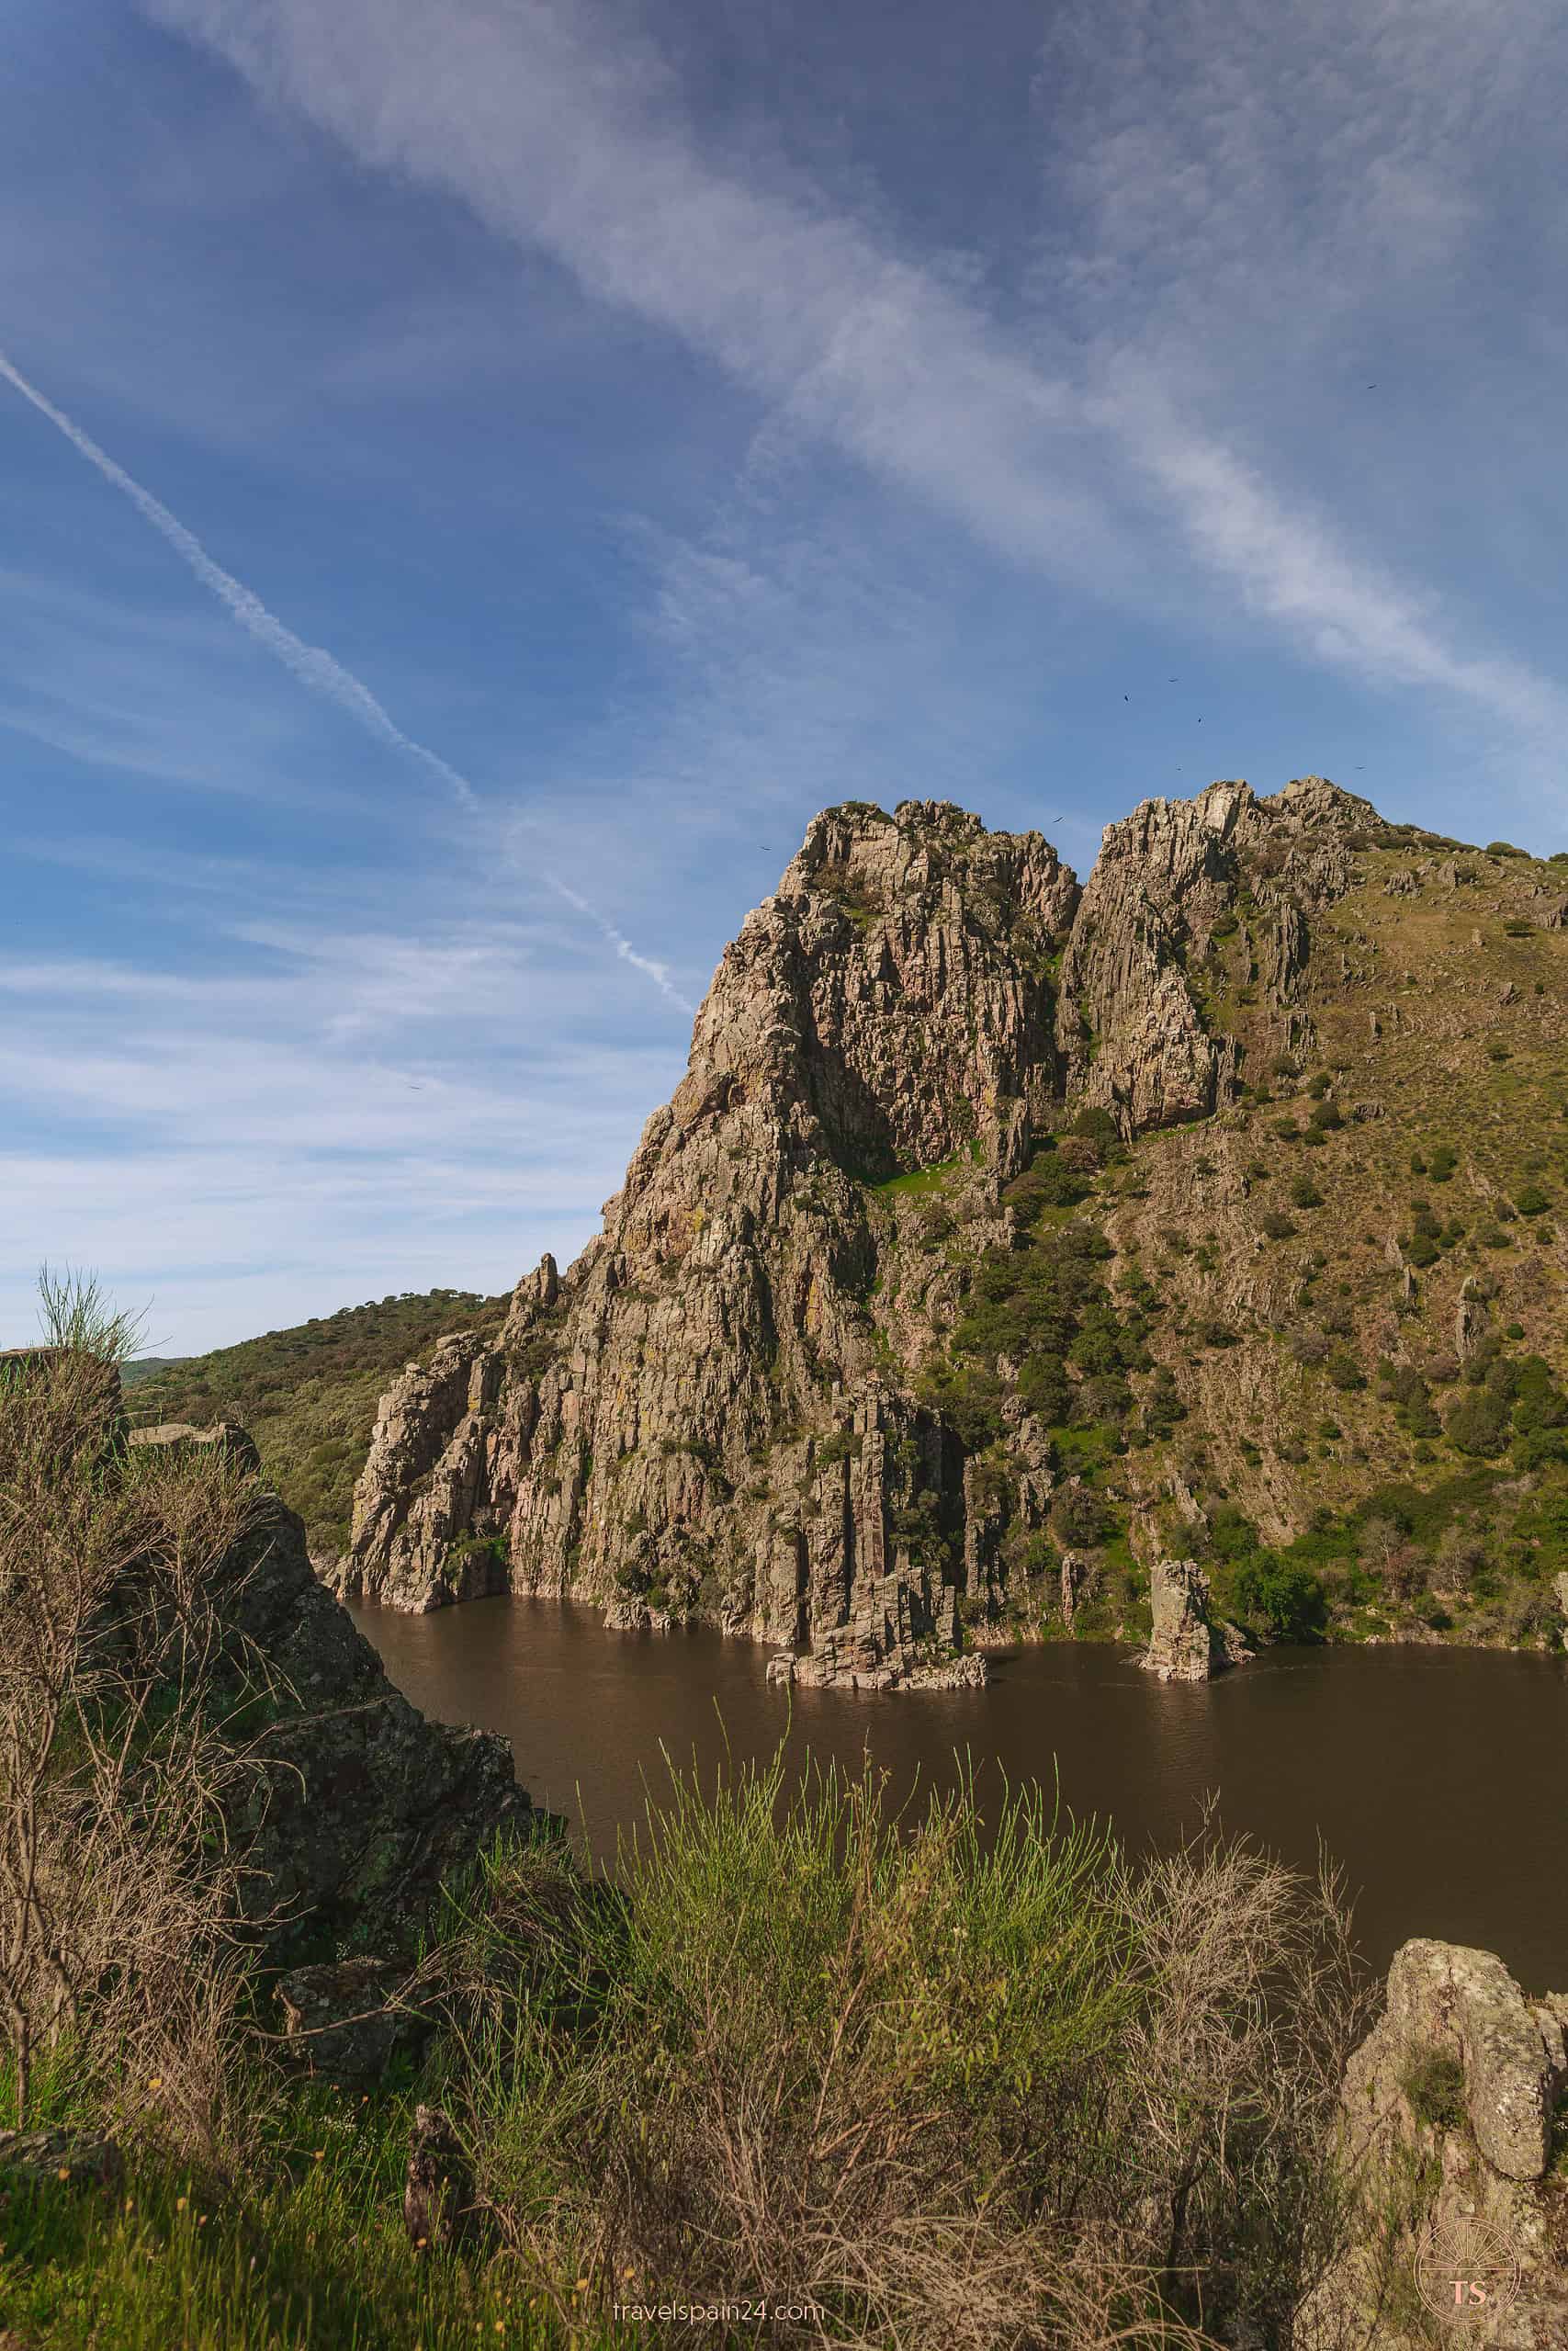 Panoramic view from Salto del Gitano in Monfragüe National Park, featuring the Peña Falcón rock formation and the Tagus River, a popular spot for observing vultures and eagles.